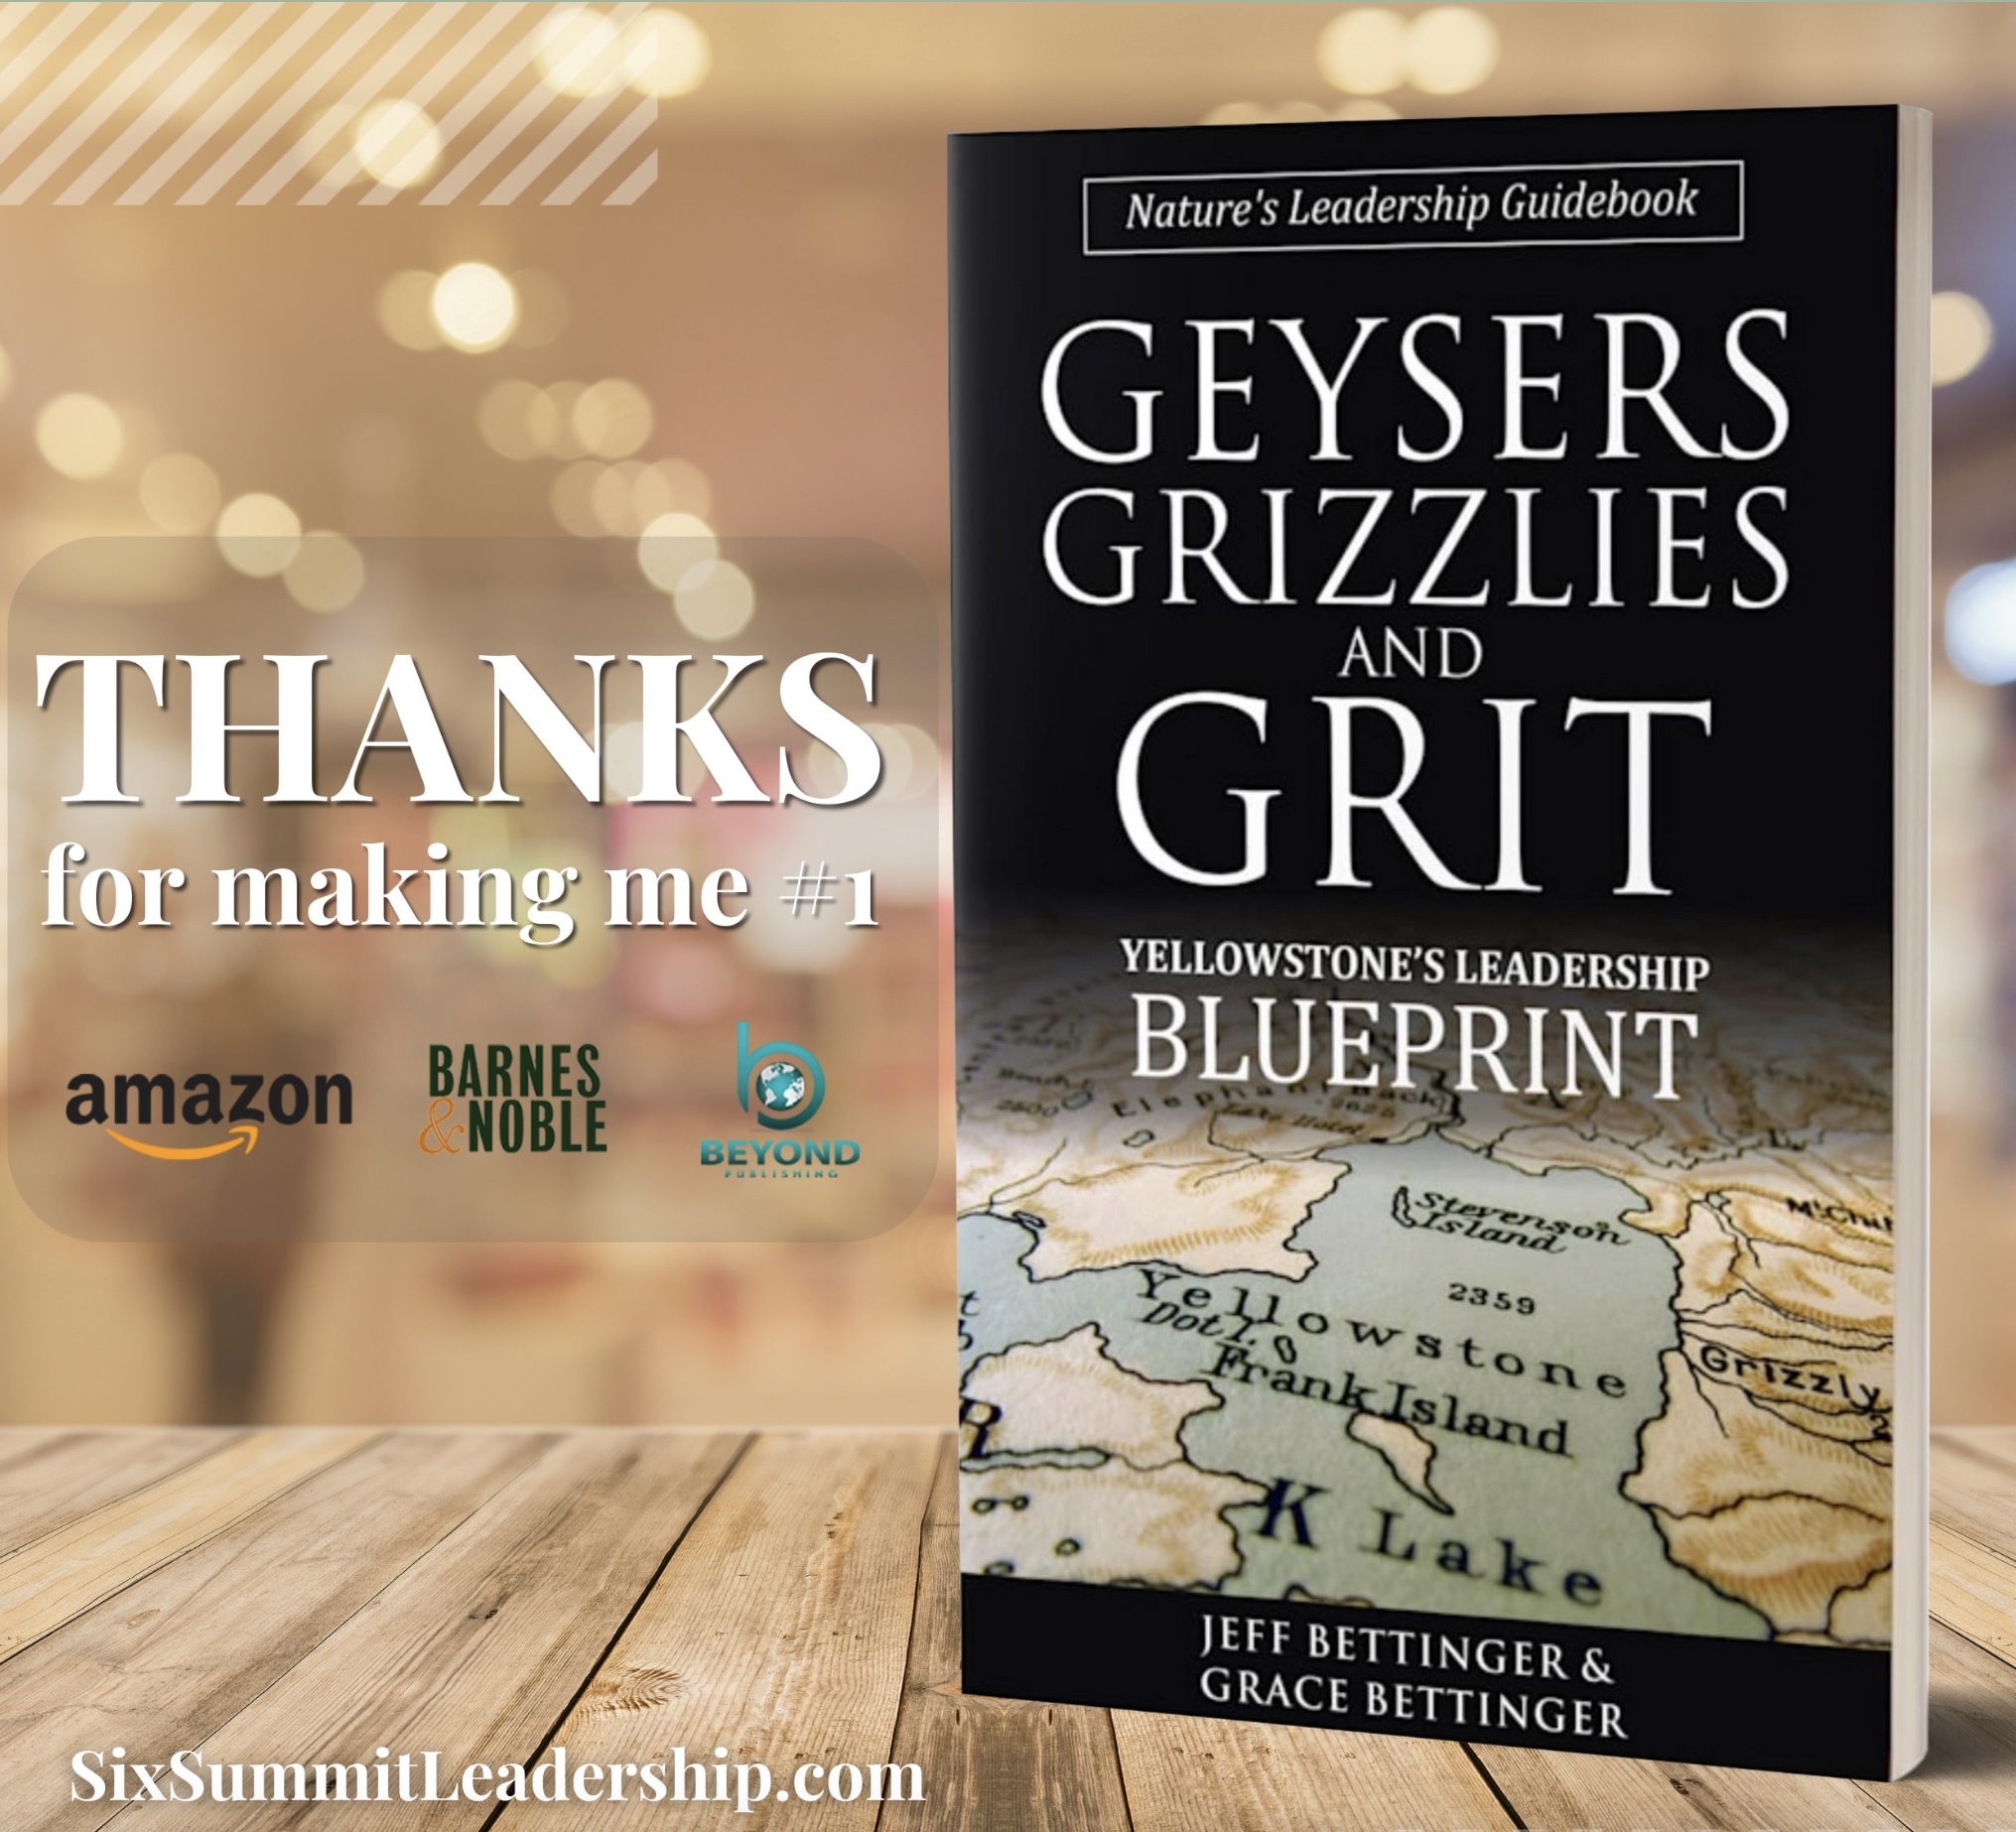 Geysers, Grizzlies and Grit: Yellowstone's Leadership Blueprint Rises to #1 on Amazon